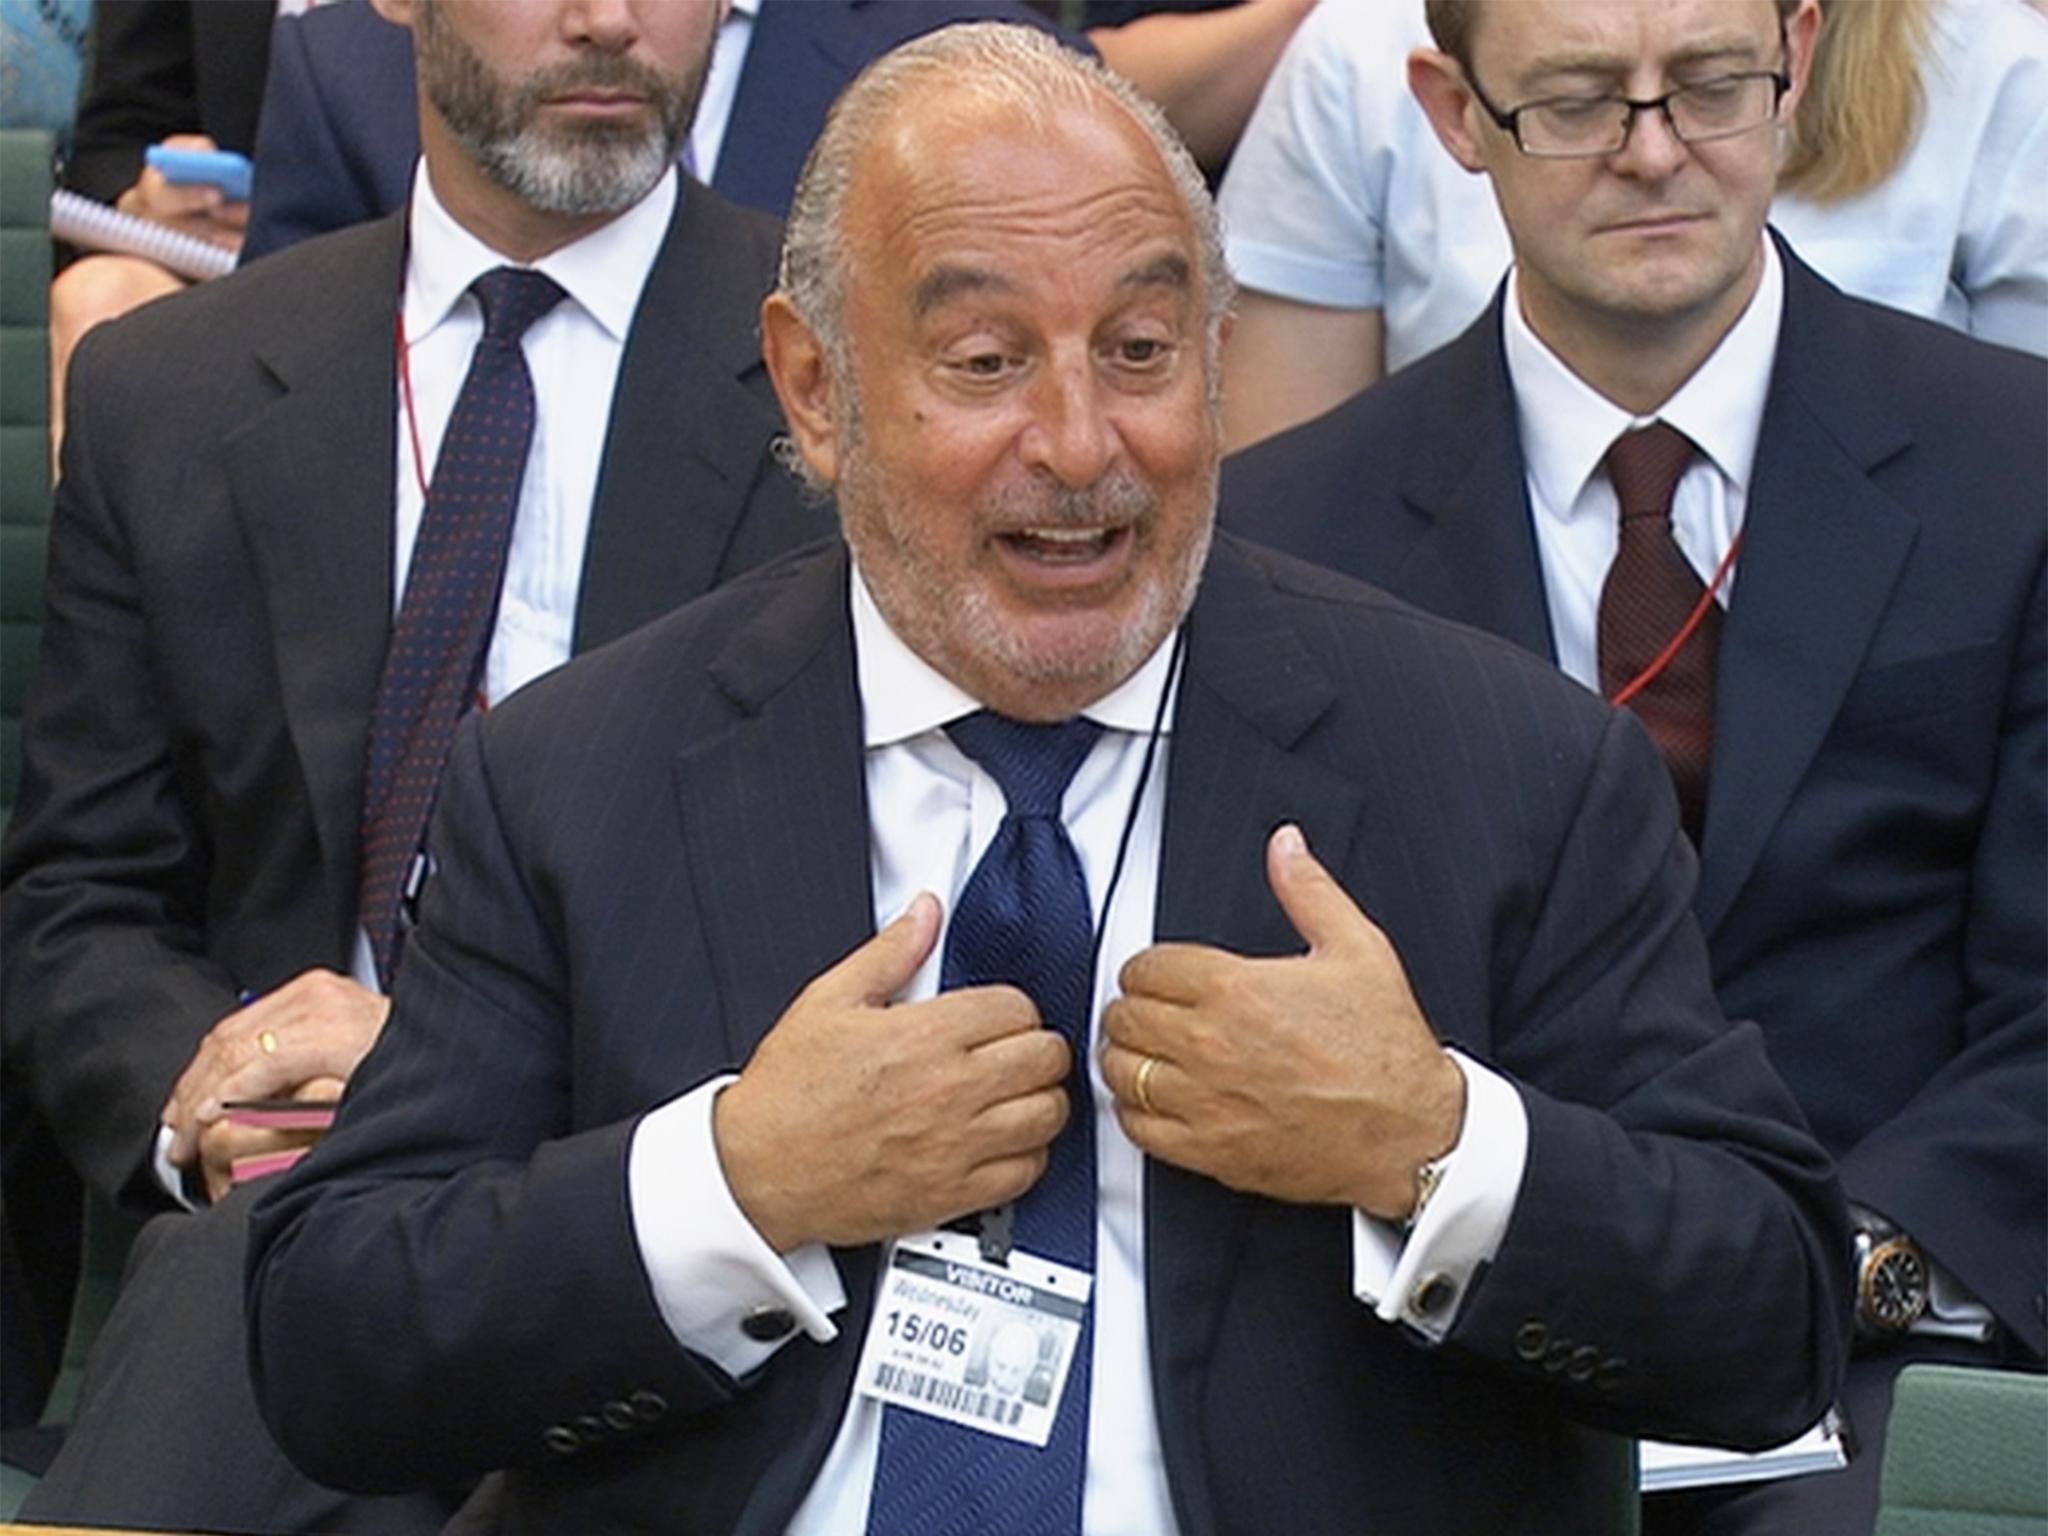 Philip Green answers MPs' questions about the collapse of BHS